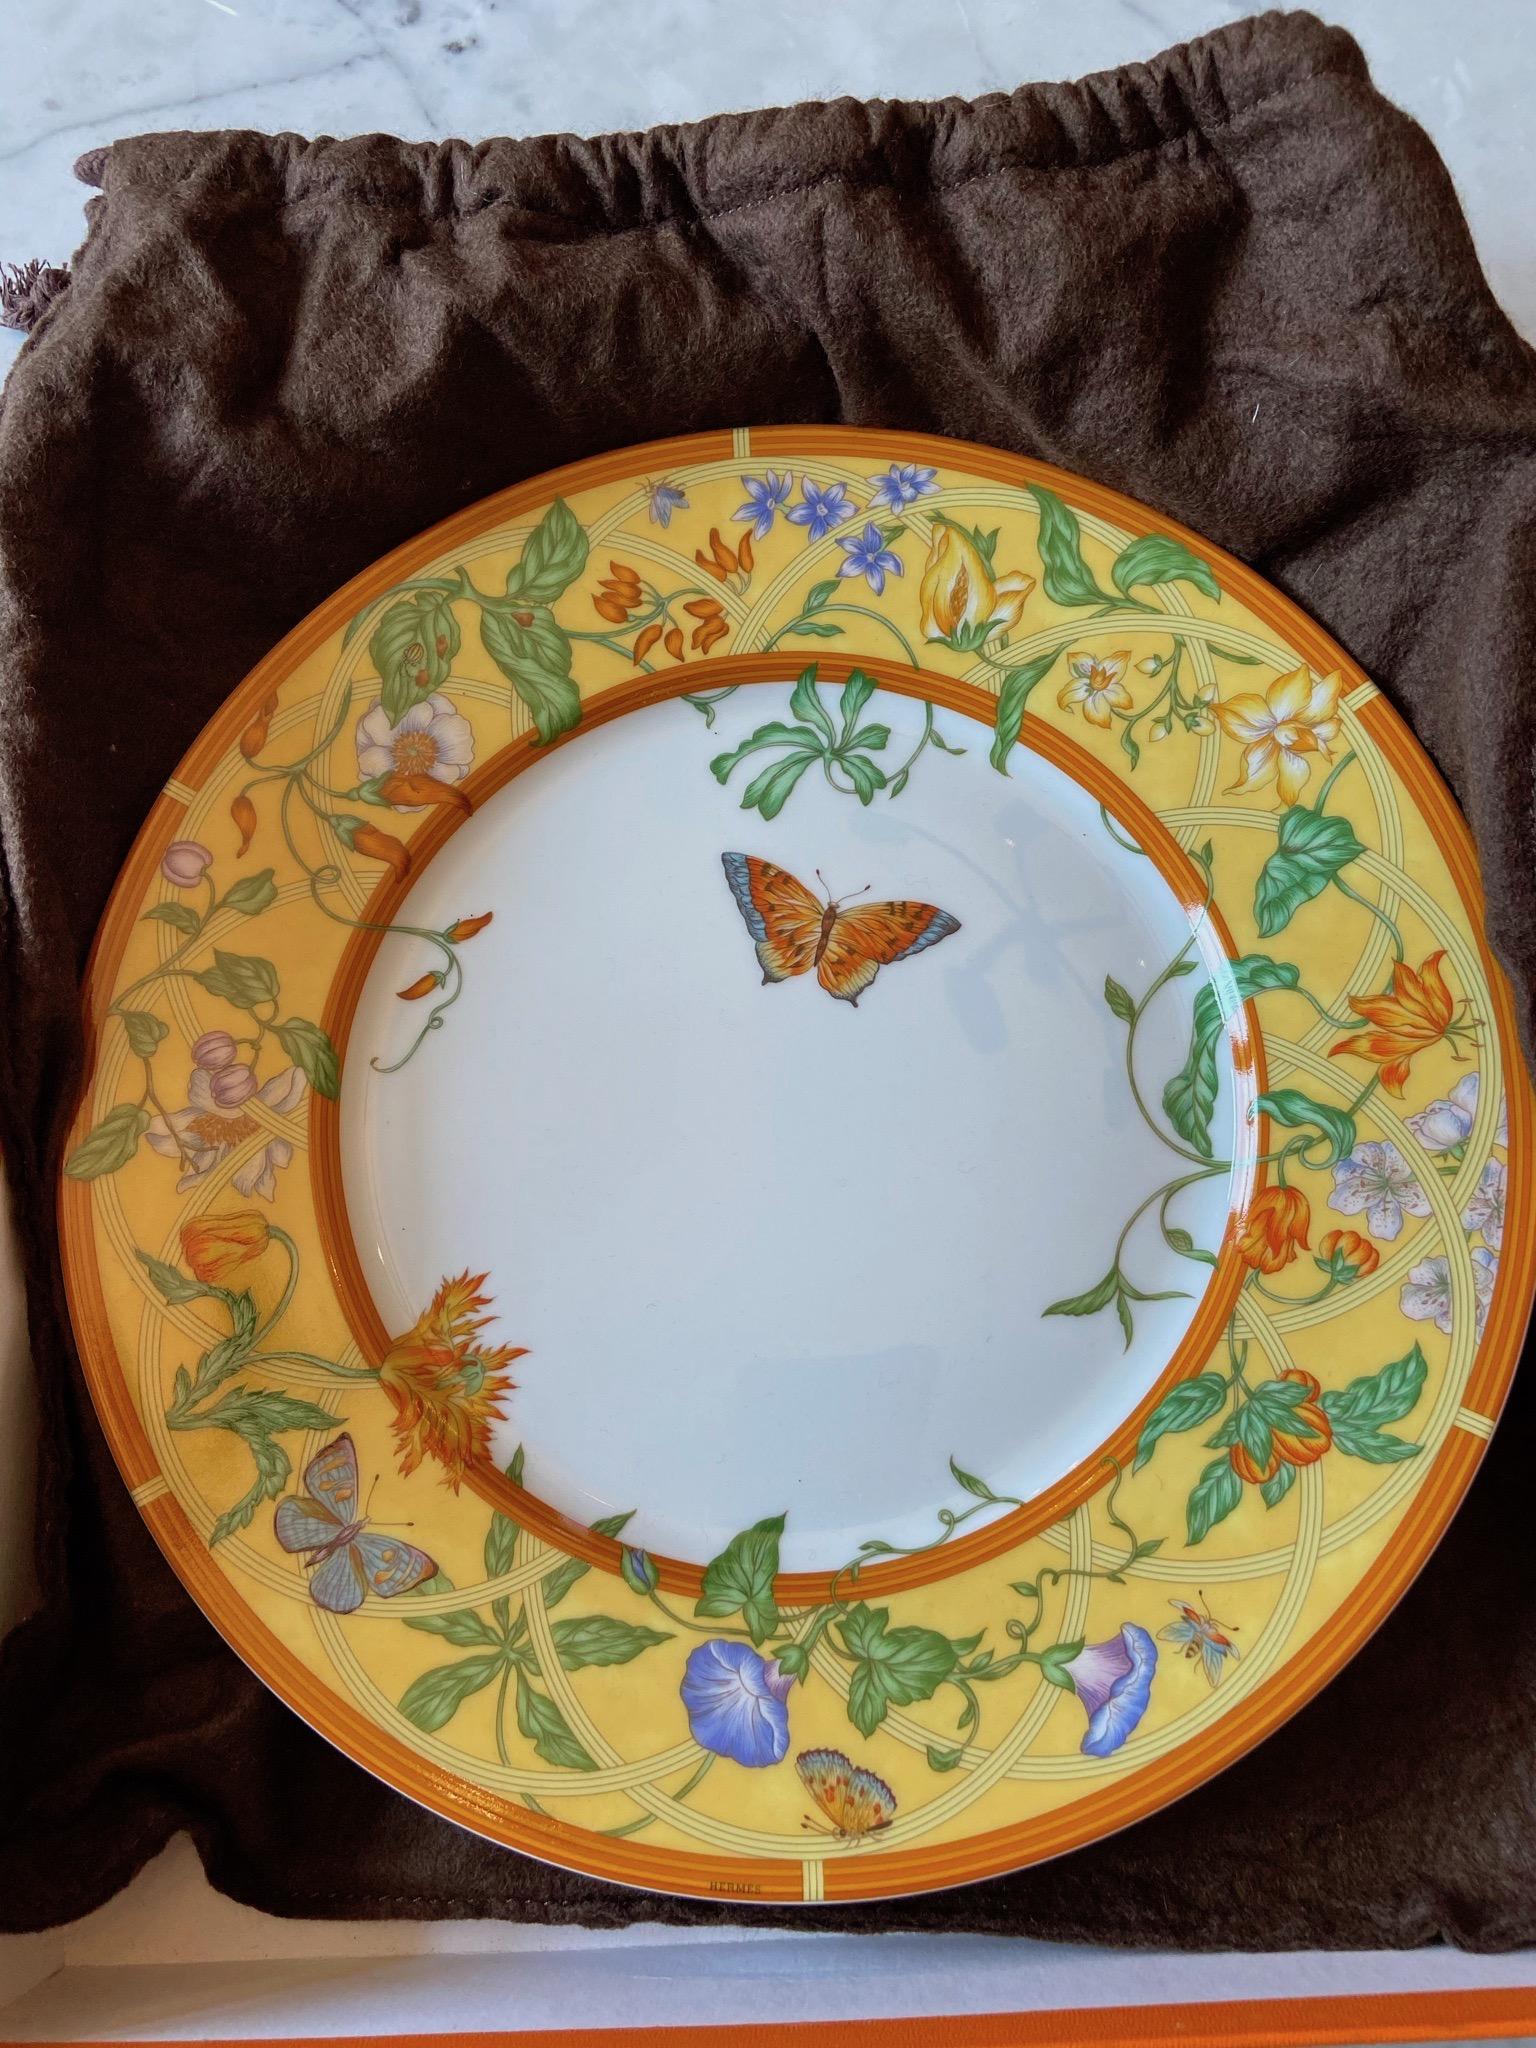 Cake/ Dessert Plate from Siesta Collection Hermès Paris, Fine Porcelain Limoges In Good Condition For Sale In London, GB